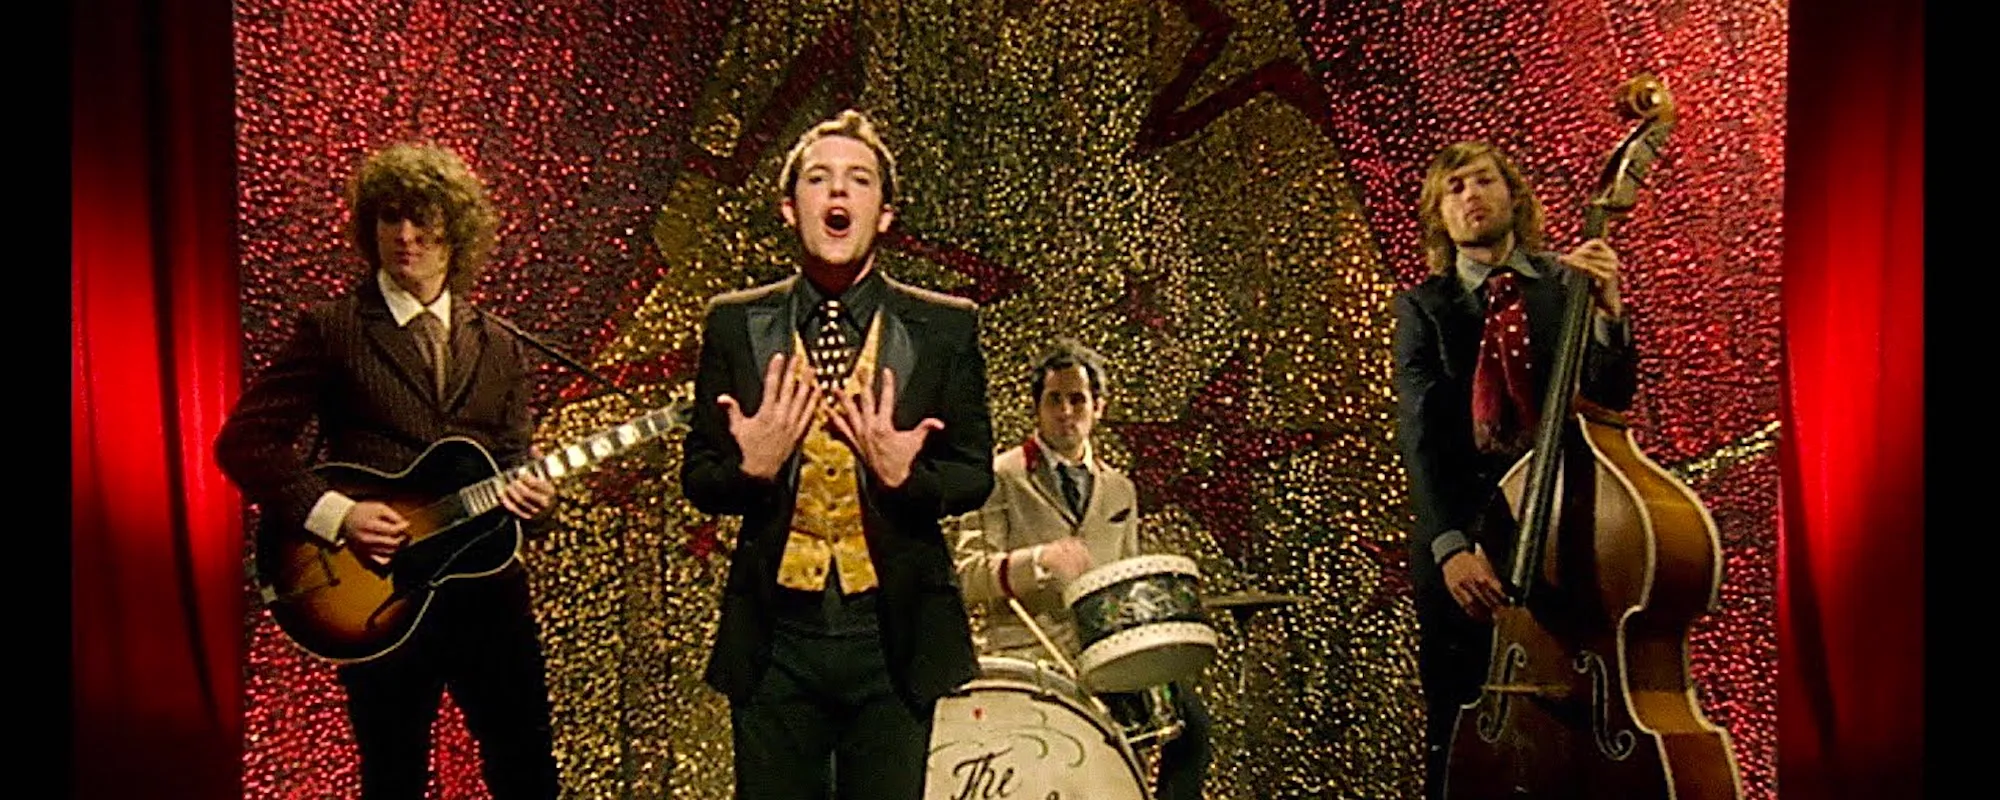 The Meaning of “Mr. Brightside,” by The Killers